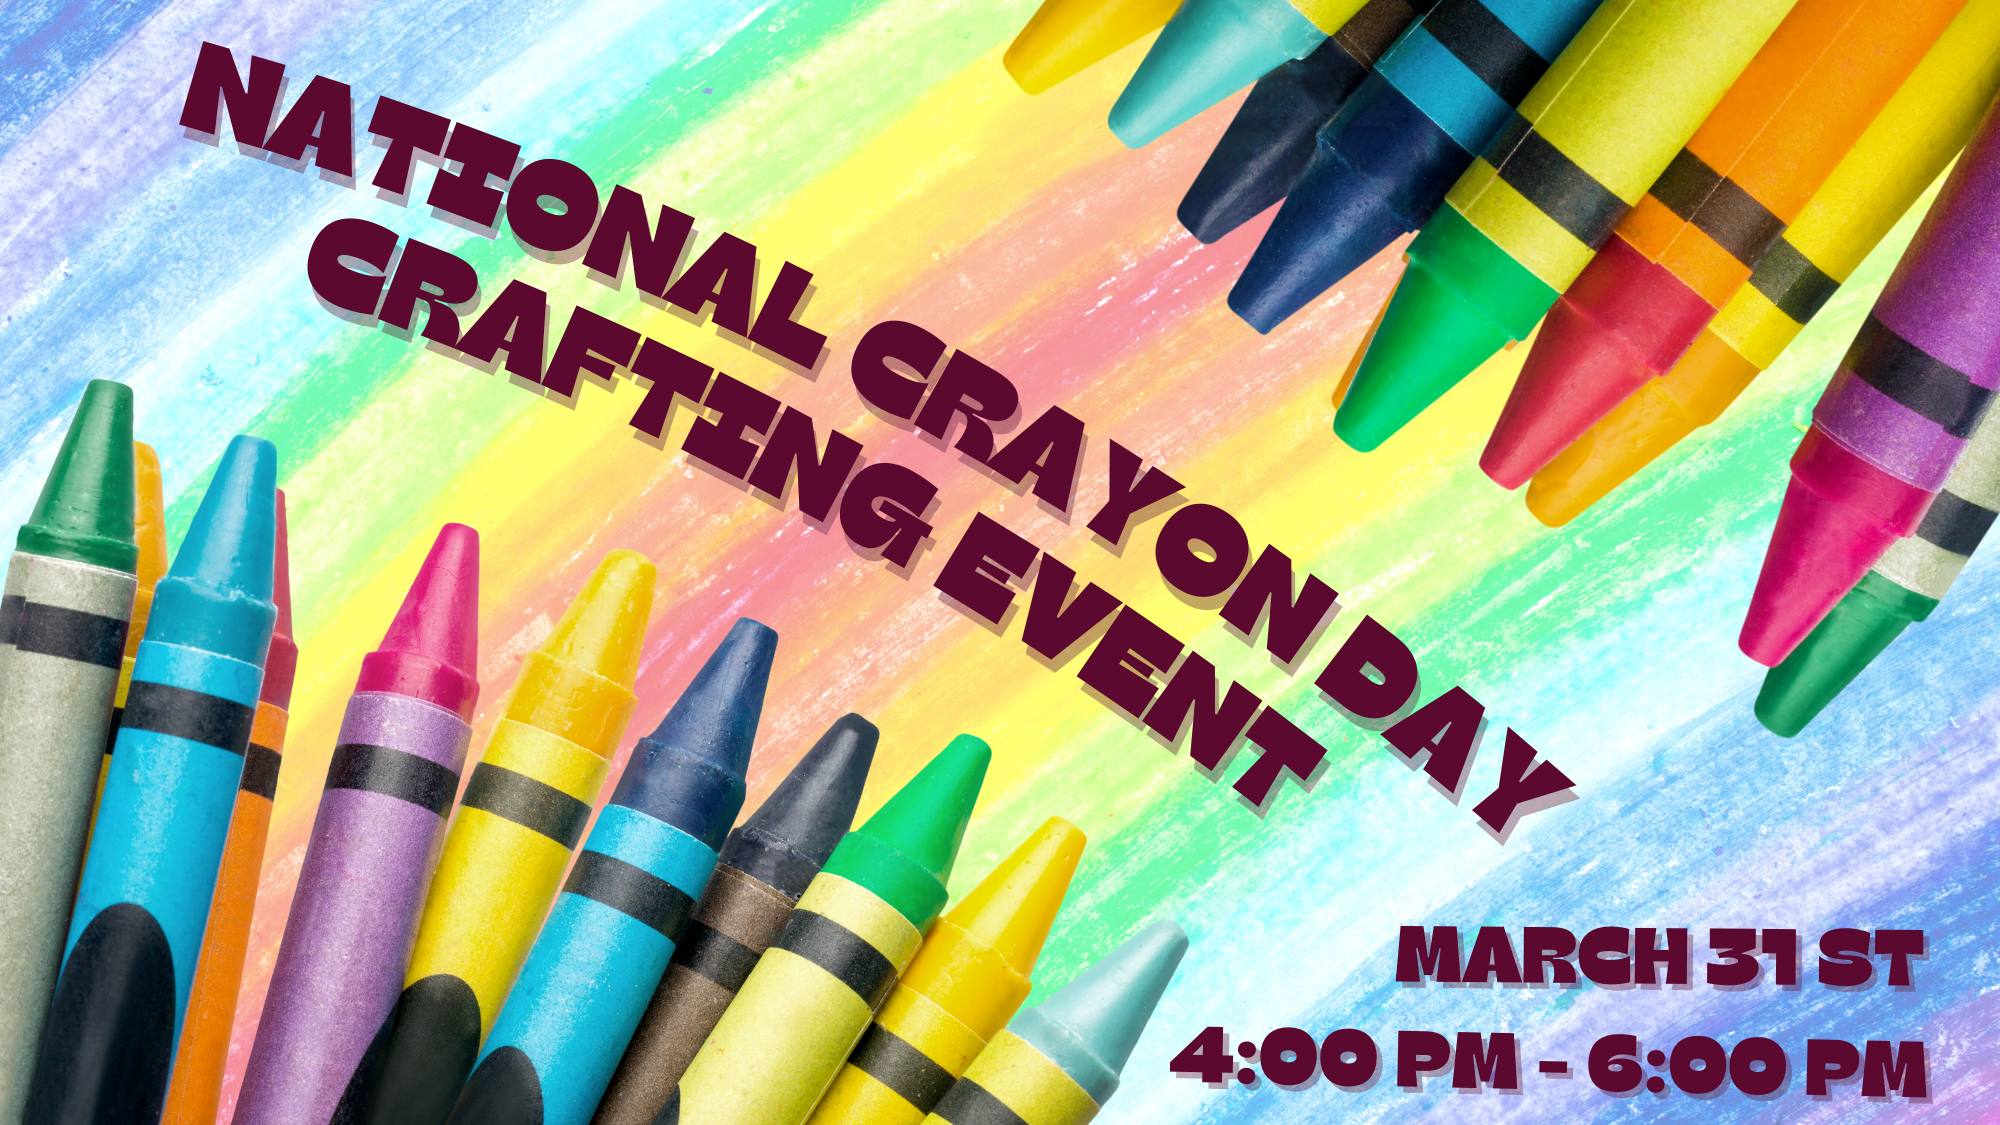 National Crayon Day Crafting Event!